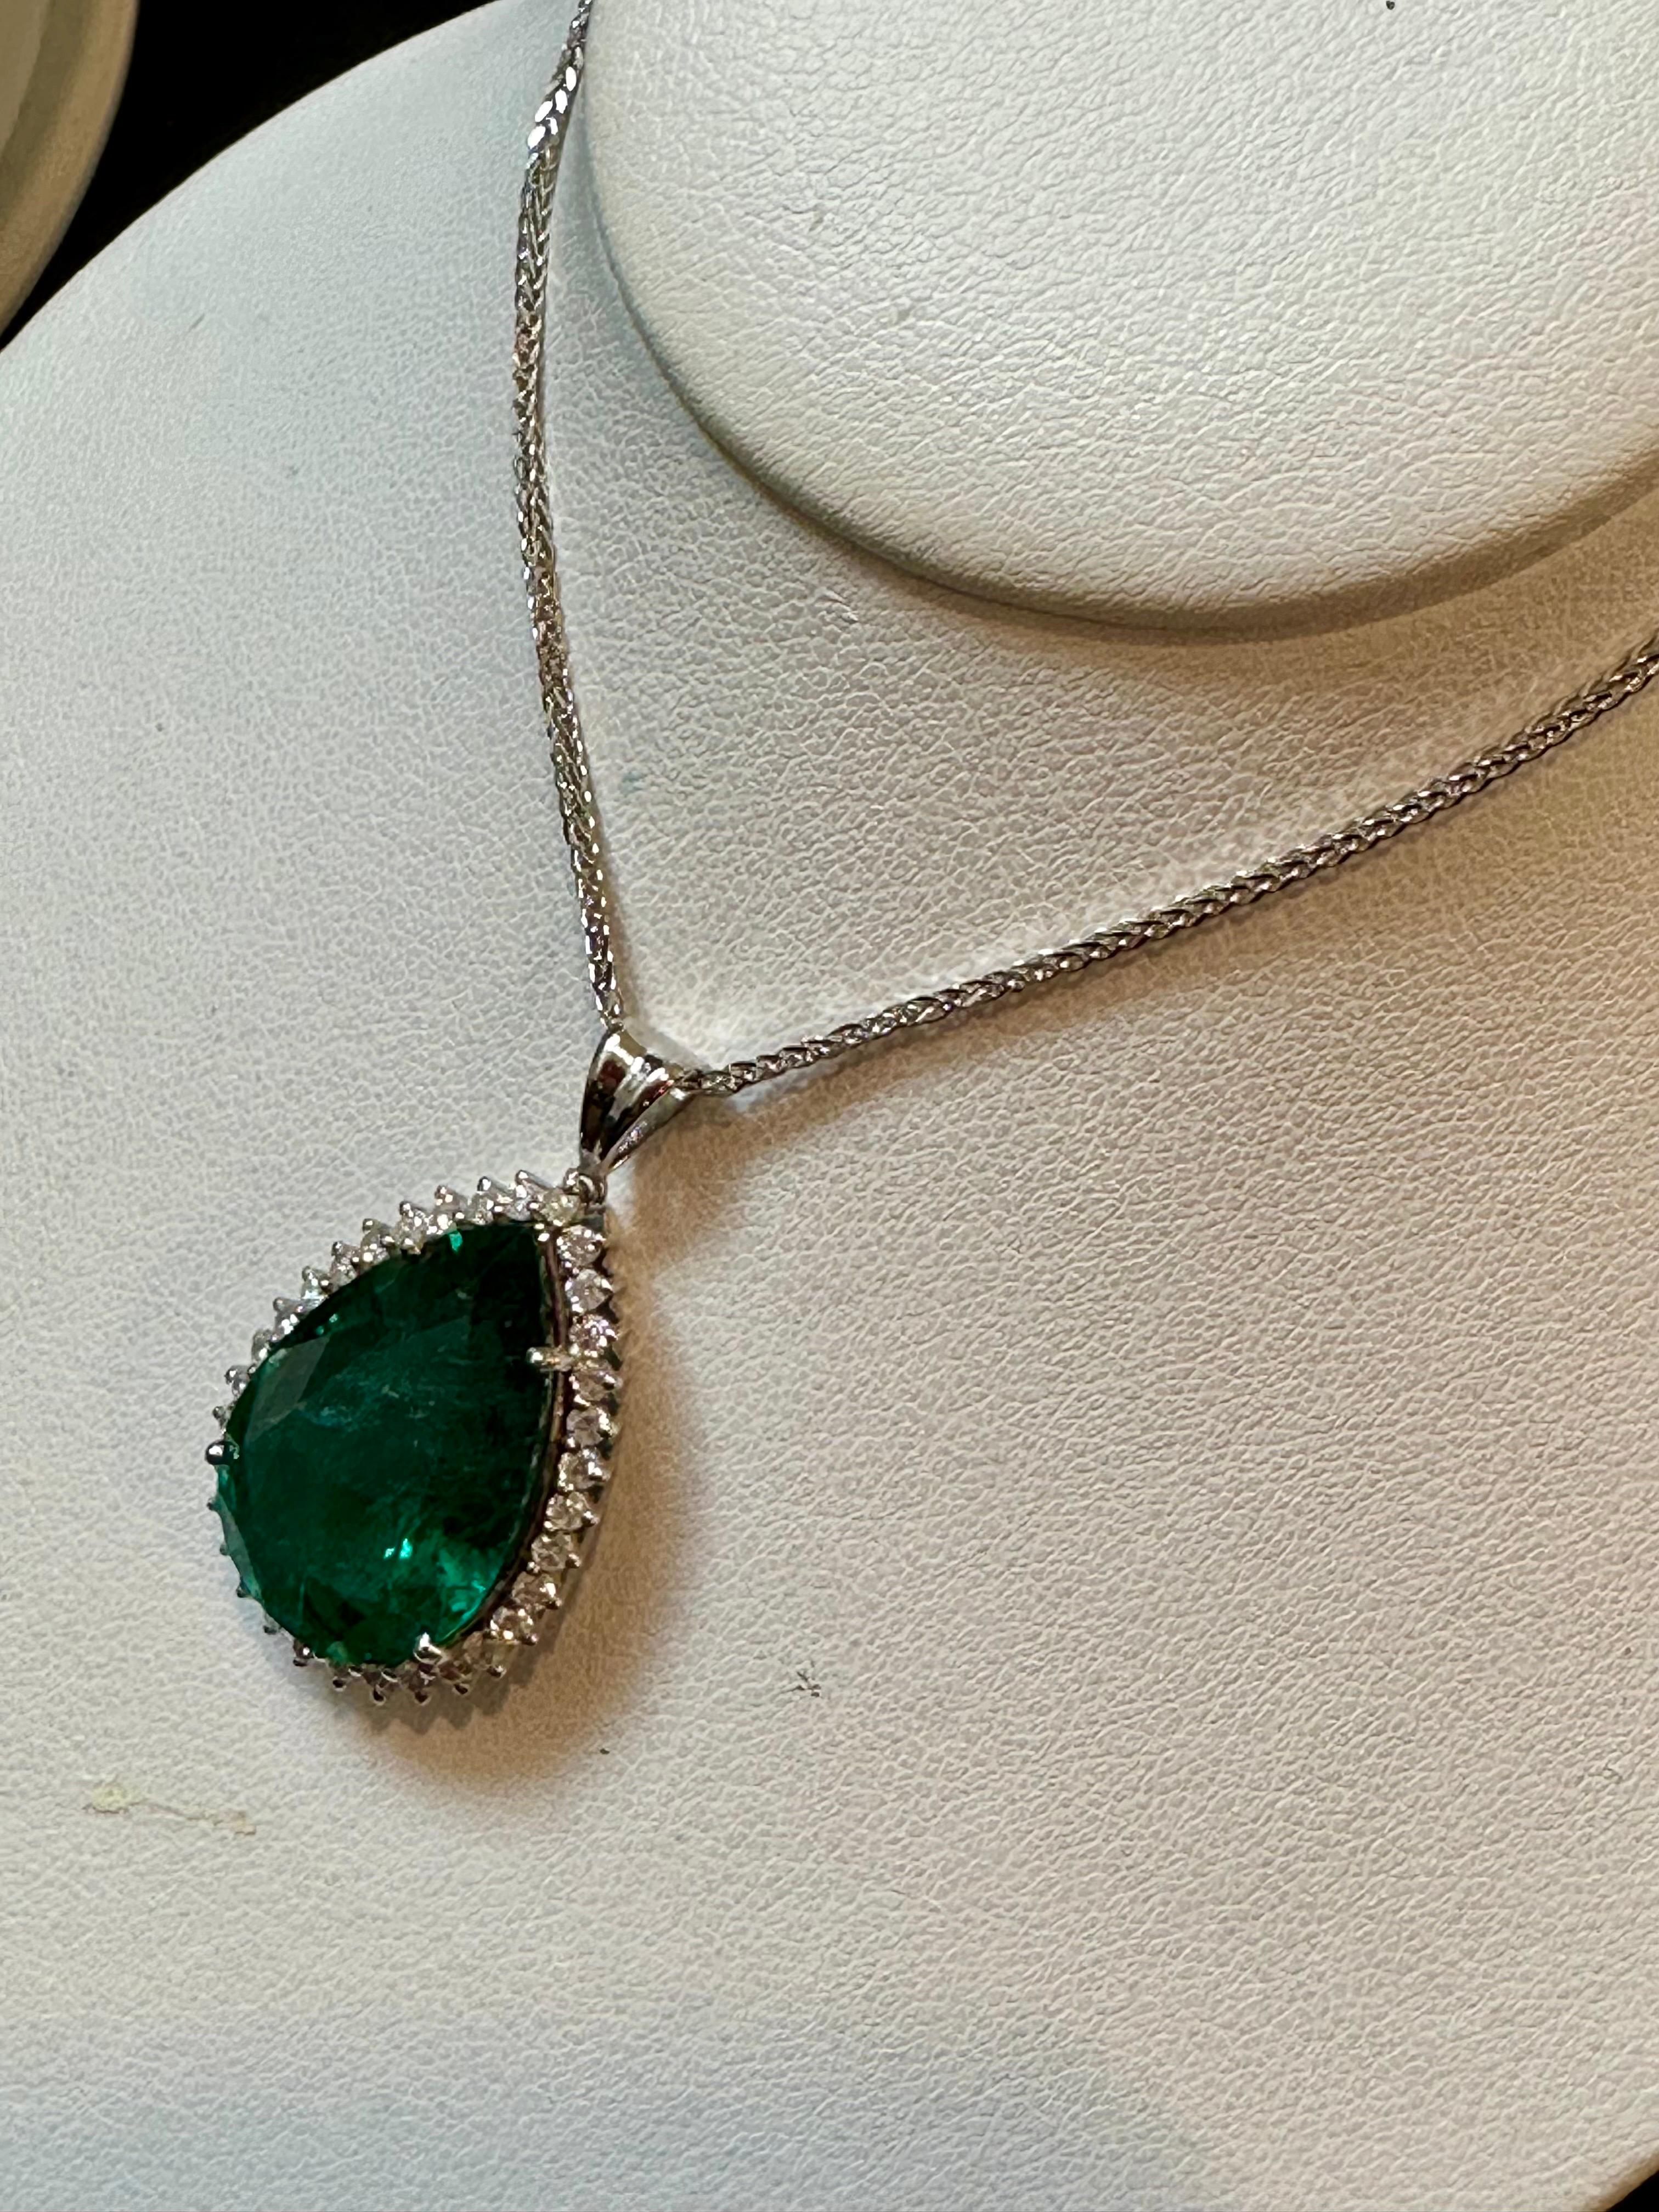 13 Ct Pear Cut Emerald & 1 Ct Diamond Halo Pendent/Necklace 14 KW Gold Chain 4